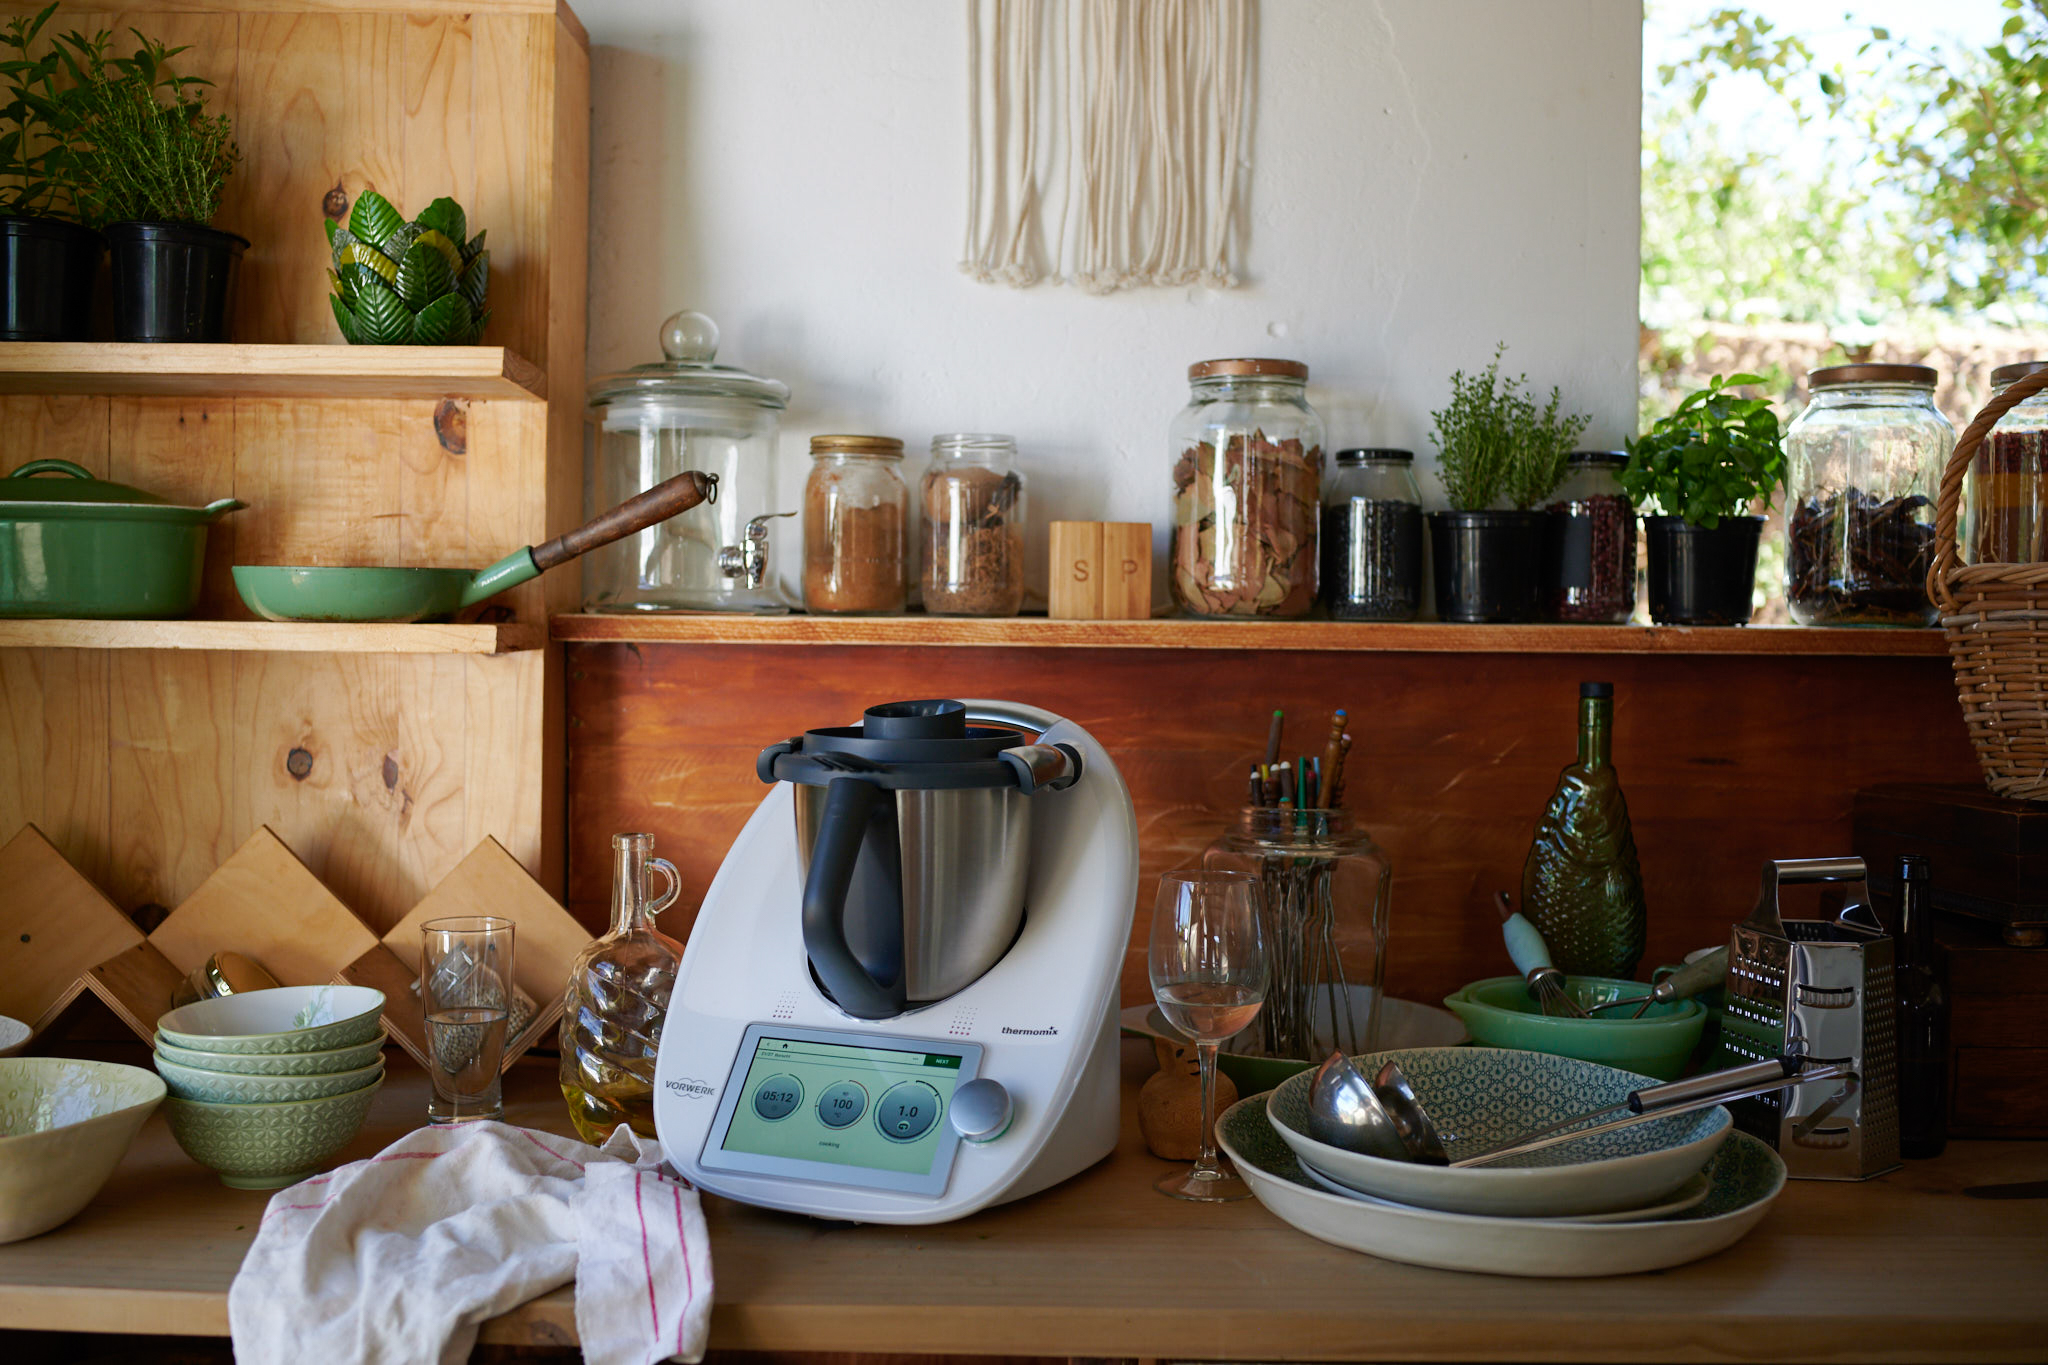 Thermomix Update